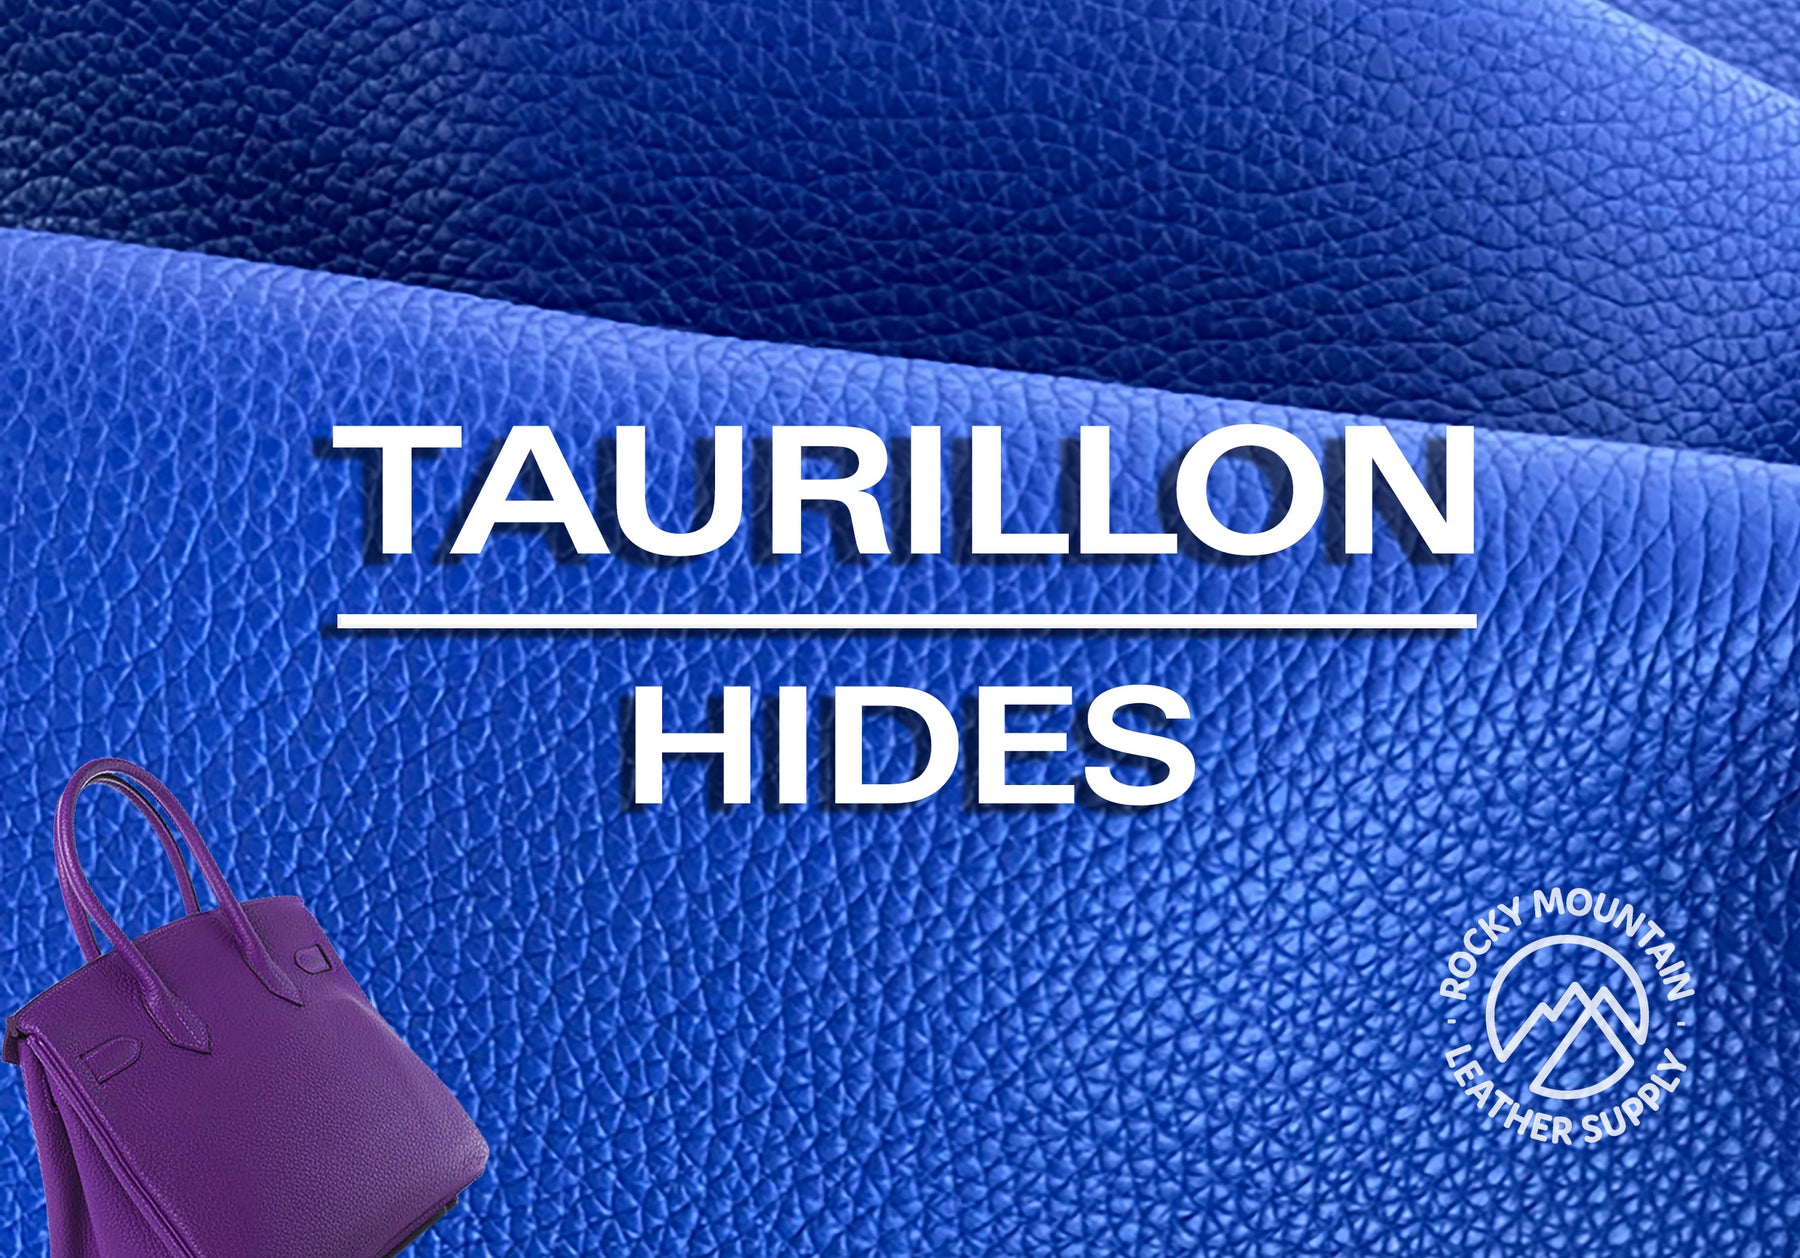 Taurillon - Luxury Handbag Large Pebbled Young Bull Leather (panels) Raisin / (1 Sqft) 9x16 or 12x12 *Size Depends on Availability by Rocky